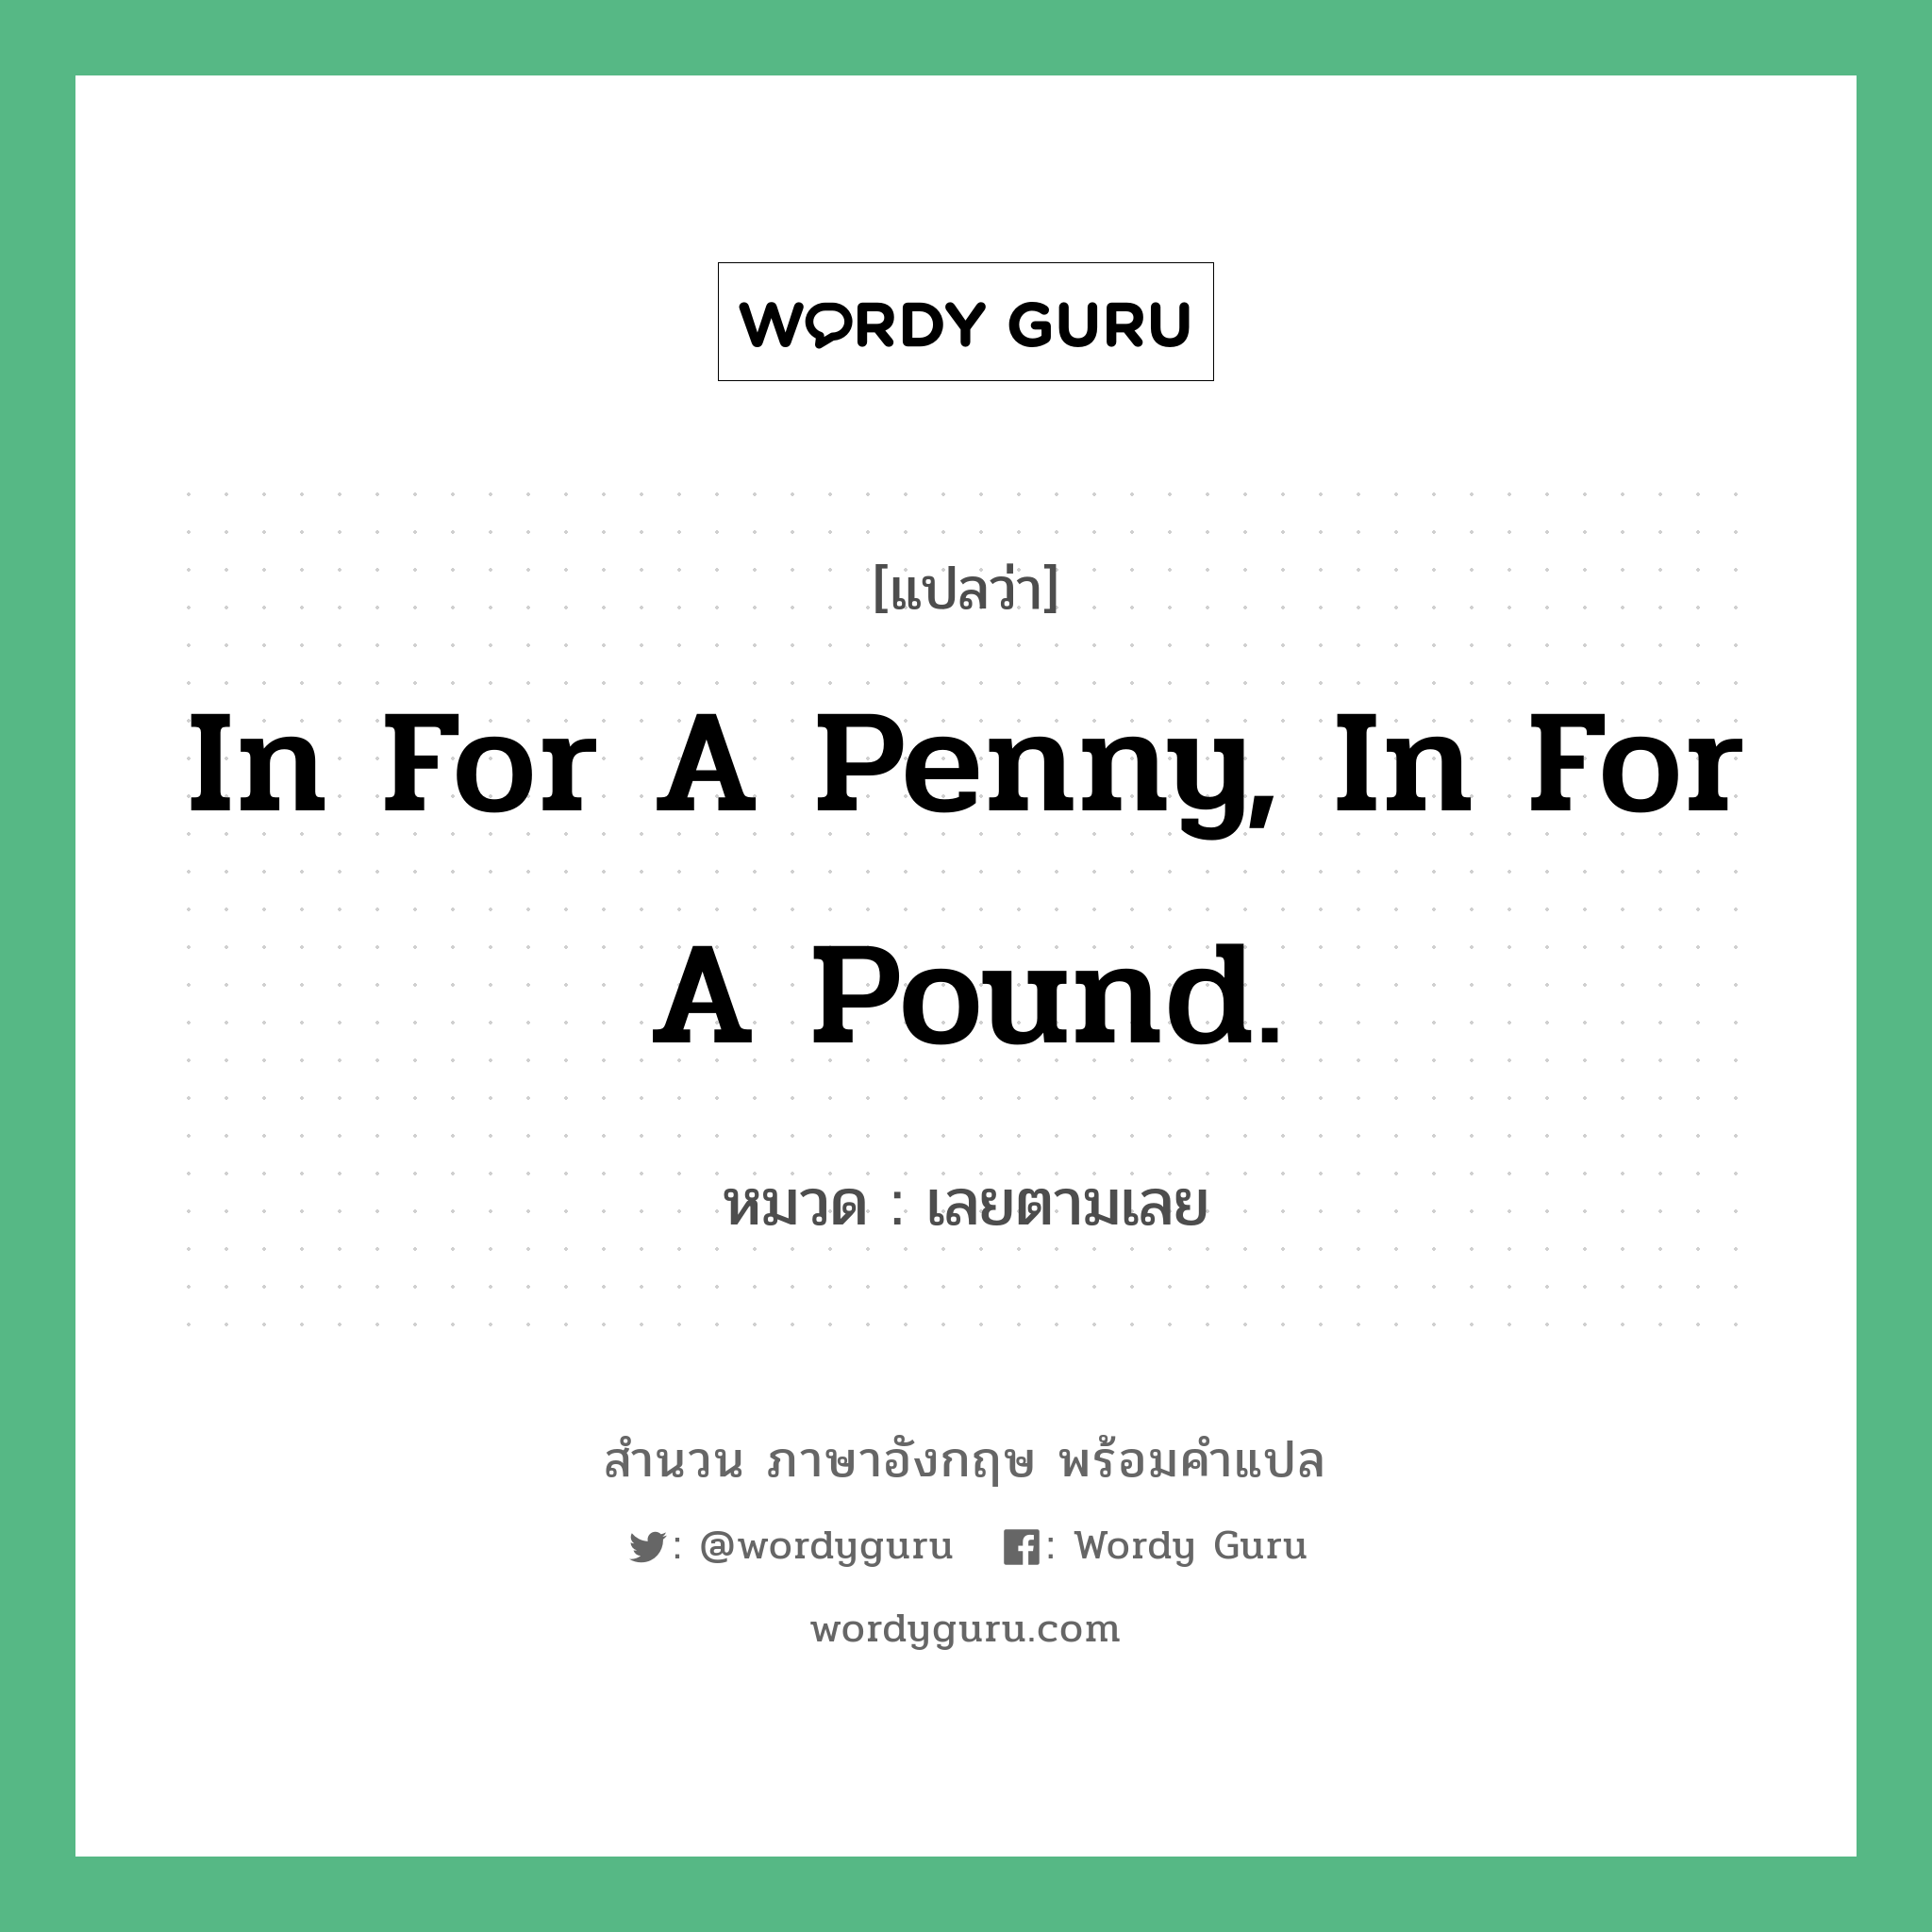 In for a penny, in for a pound. แปลว่า?, สำนวนภาษาอังกฤษ In for a penny, in for a pound. หมวด เลยตามเลย คำสุภาษิต ภาษาอังกฤษ หมวด คำสุภาษิต ภาษาอังกฤษ